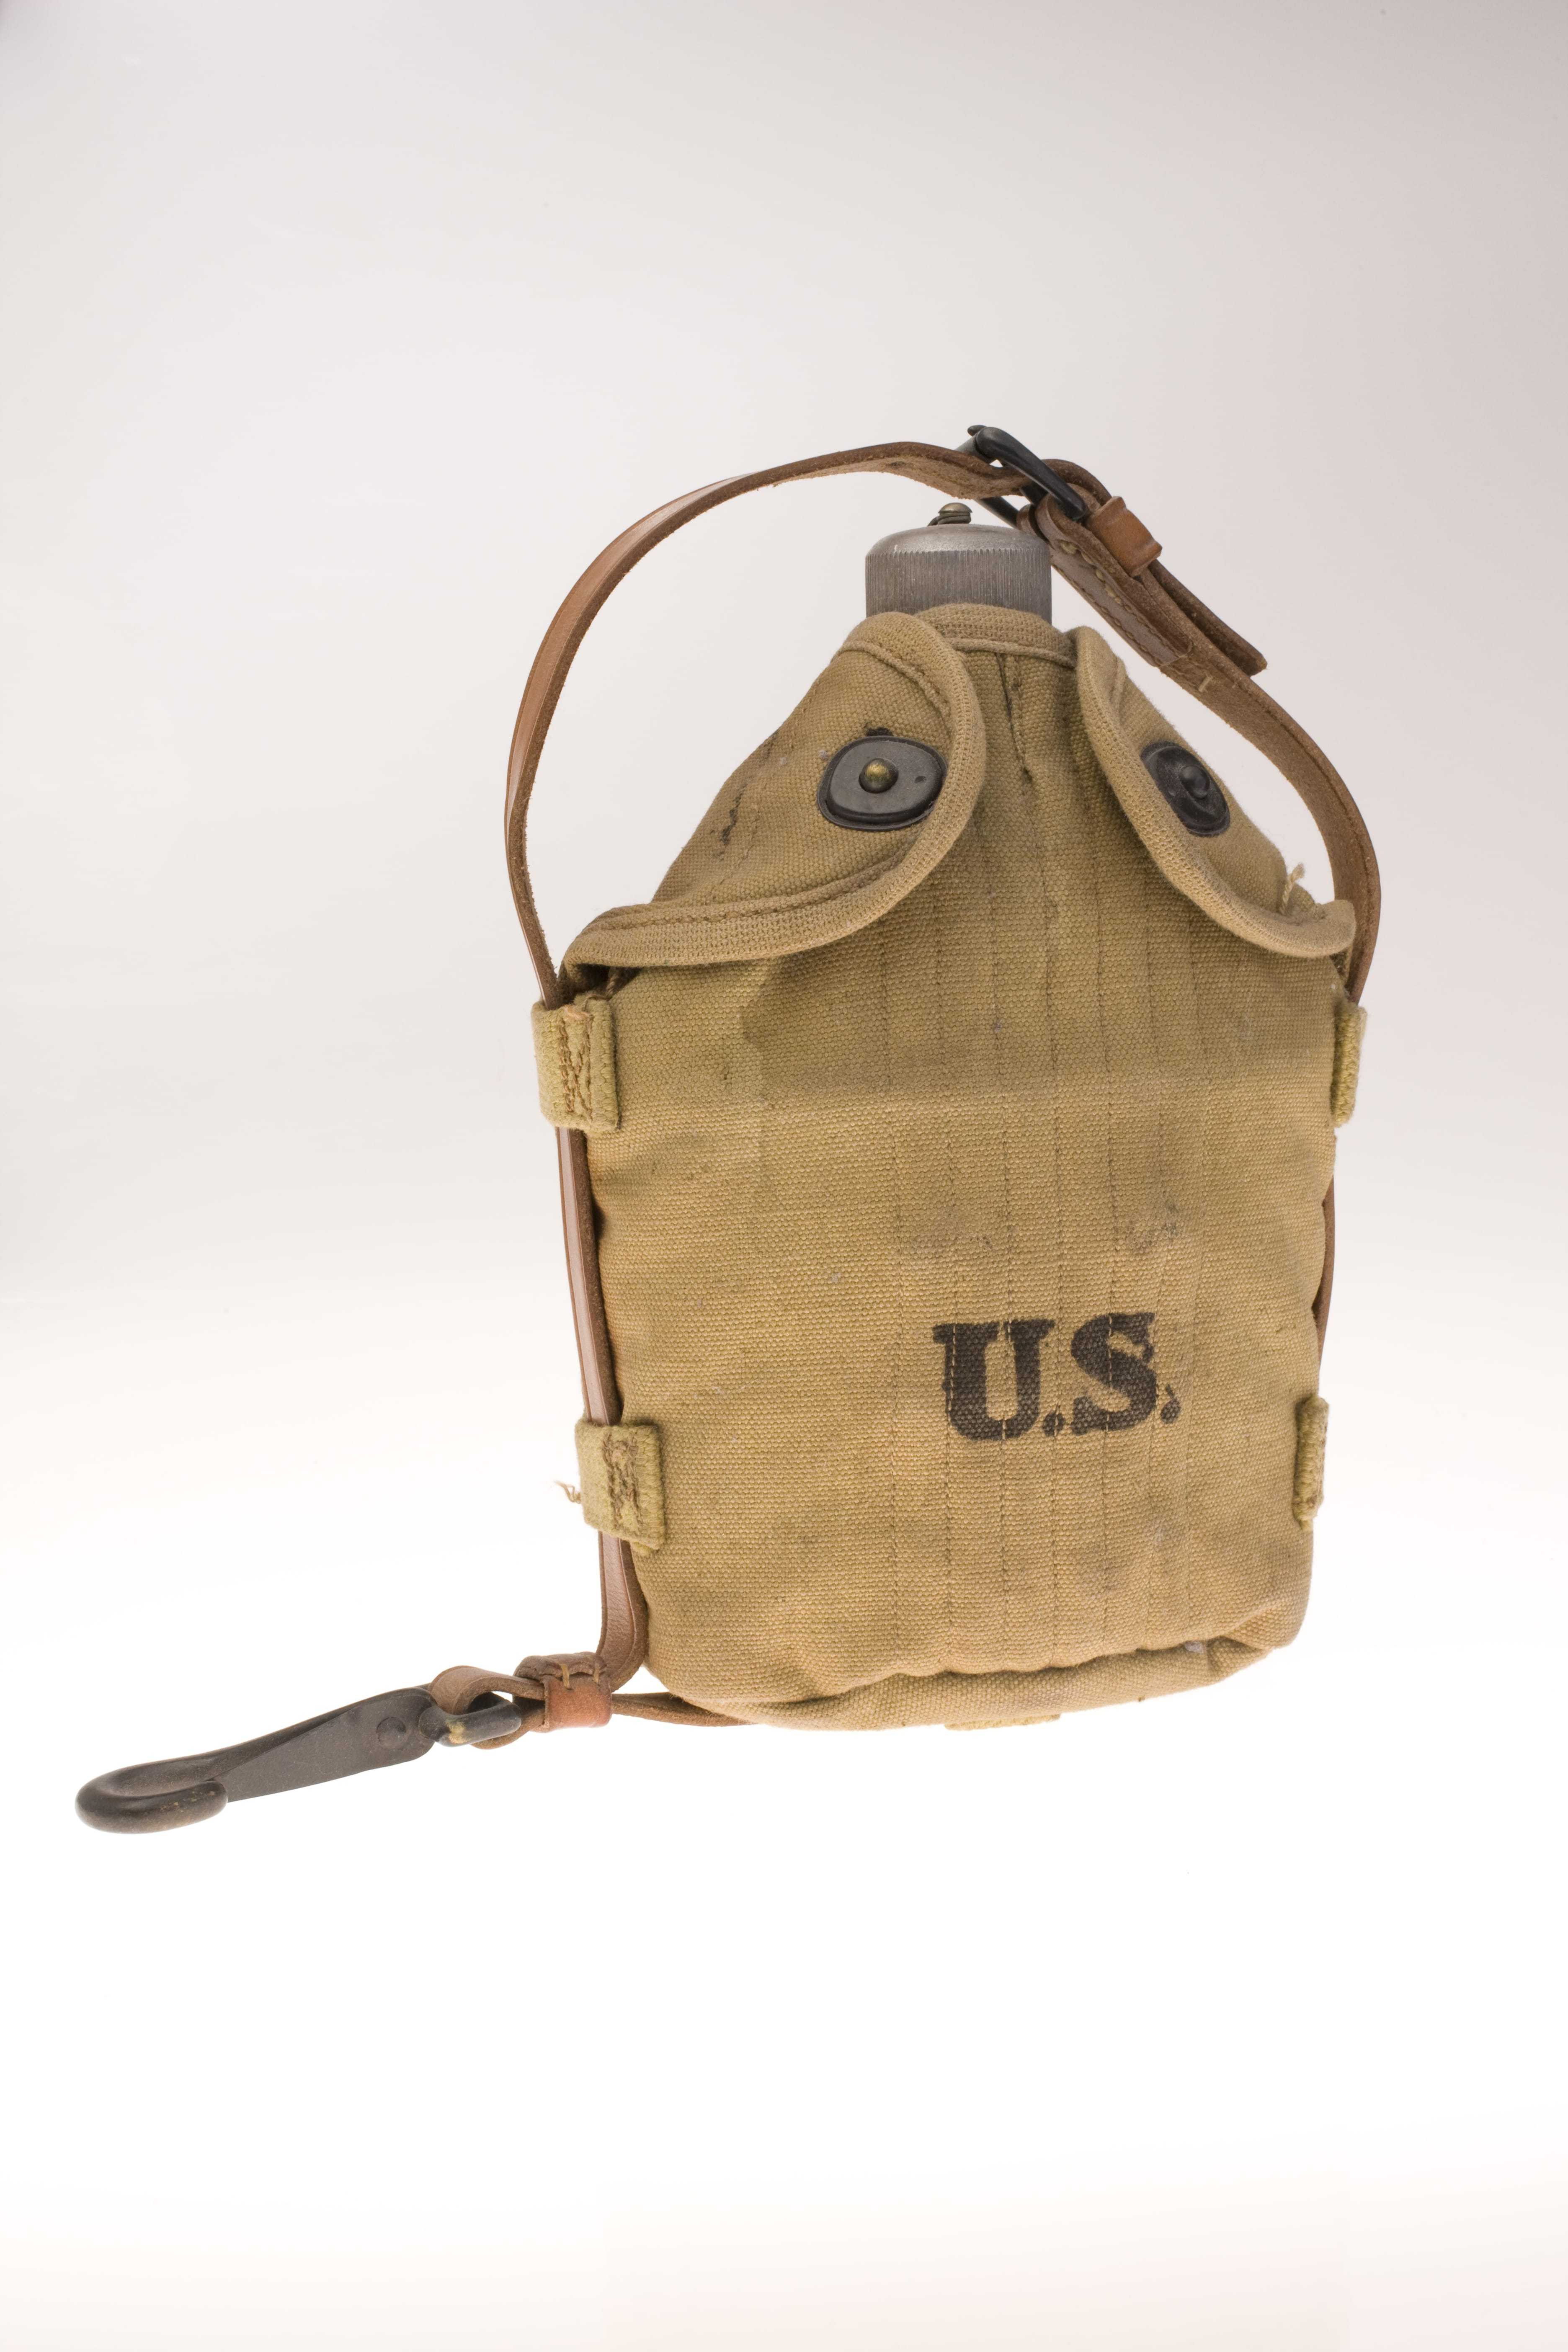 A worn, tan colored canteen with a leather strap and the words "U